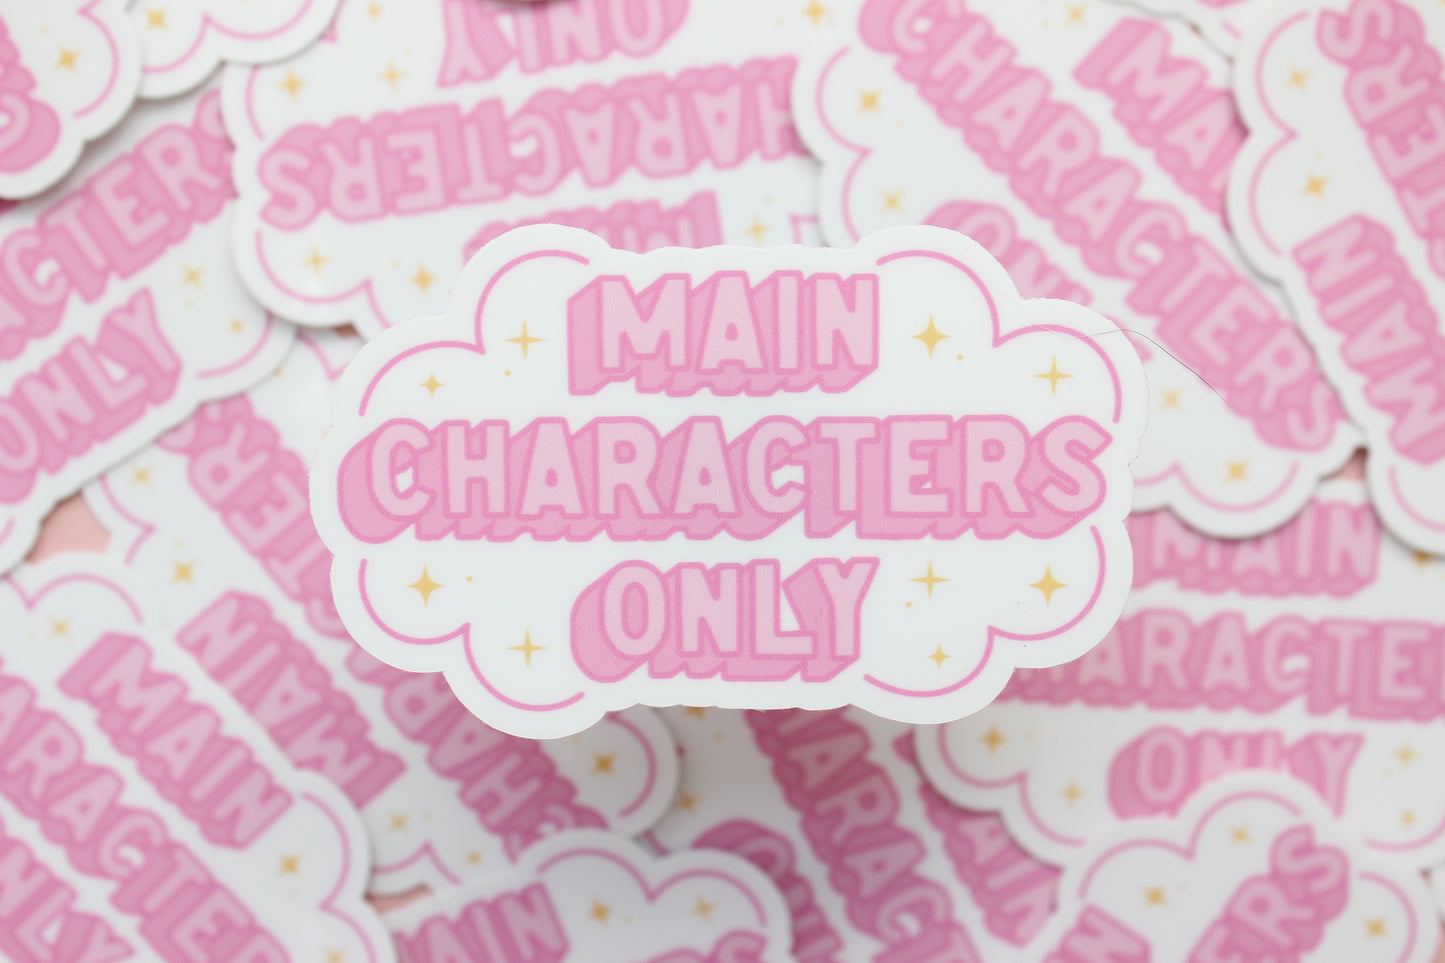 Main Characters Only Laptop Sticker